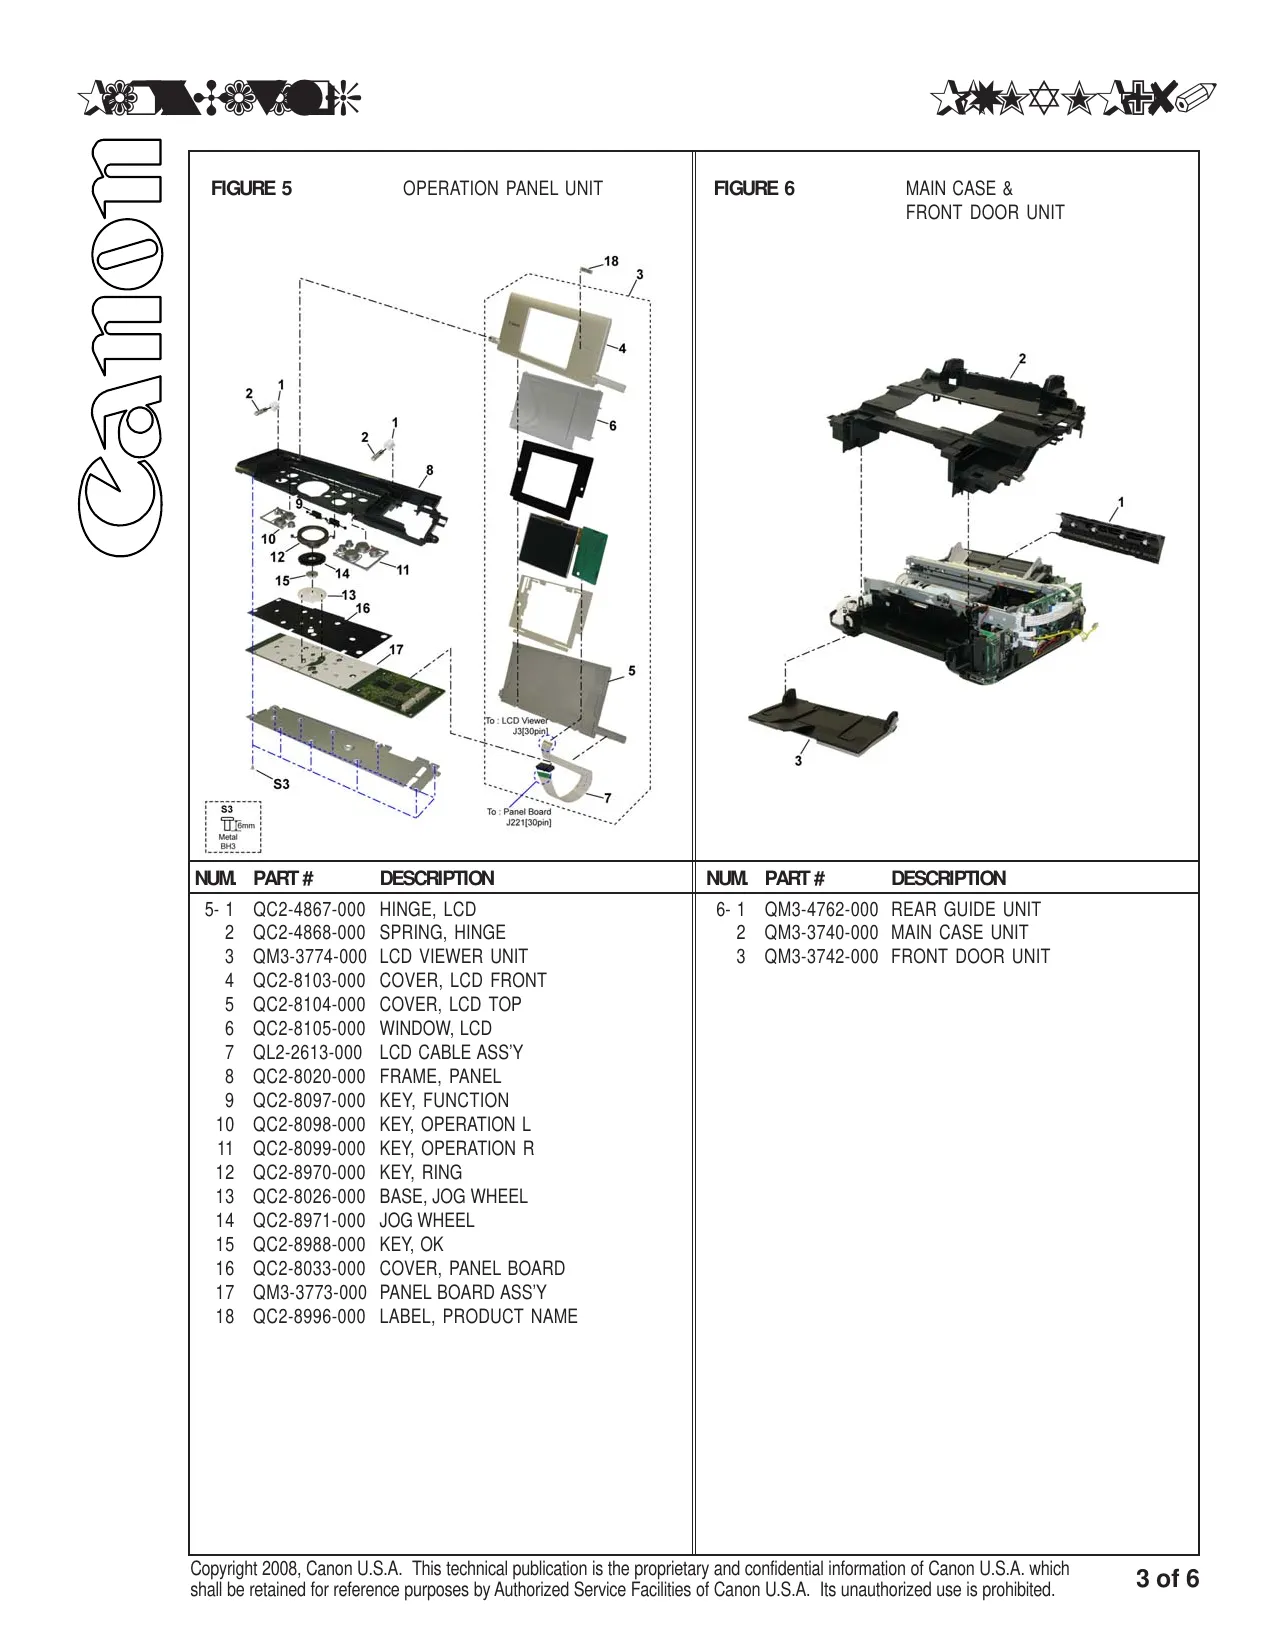 Canon Pixma MP980 multifunction inkjet printer service guide + parts catalog Preview image 4